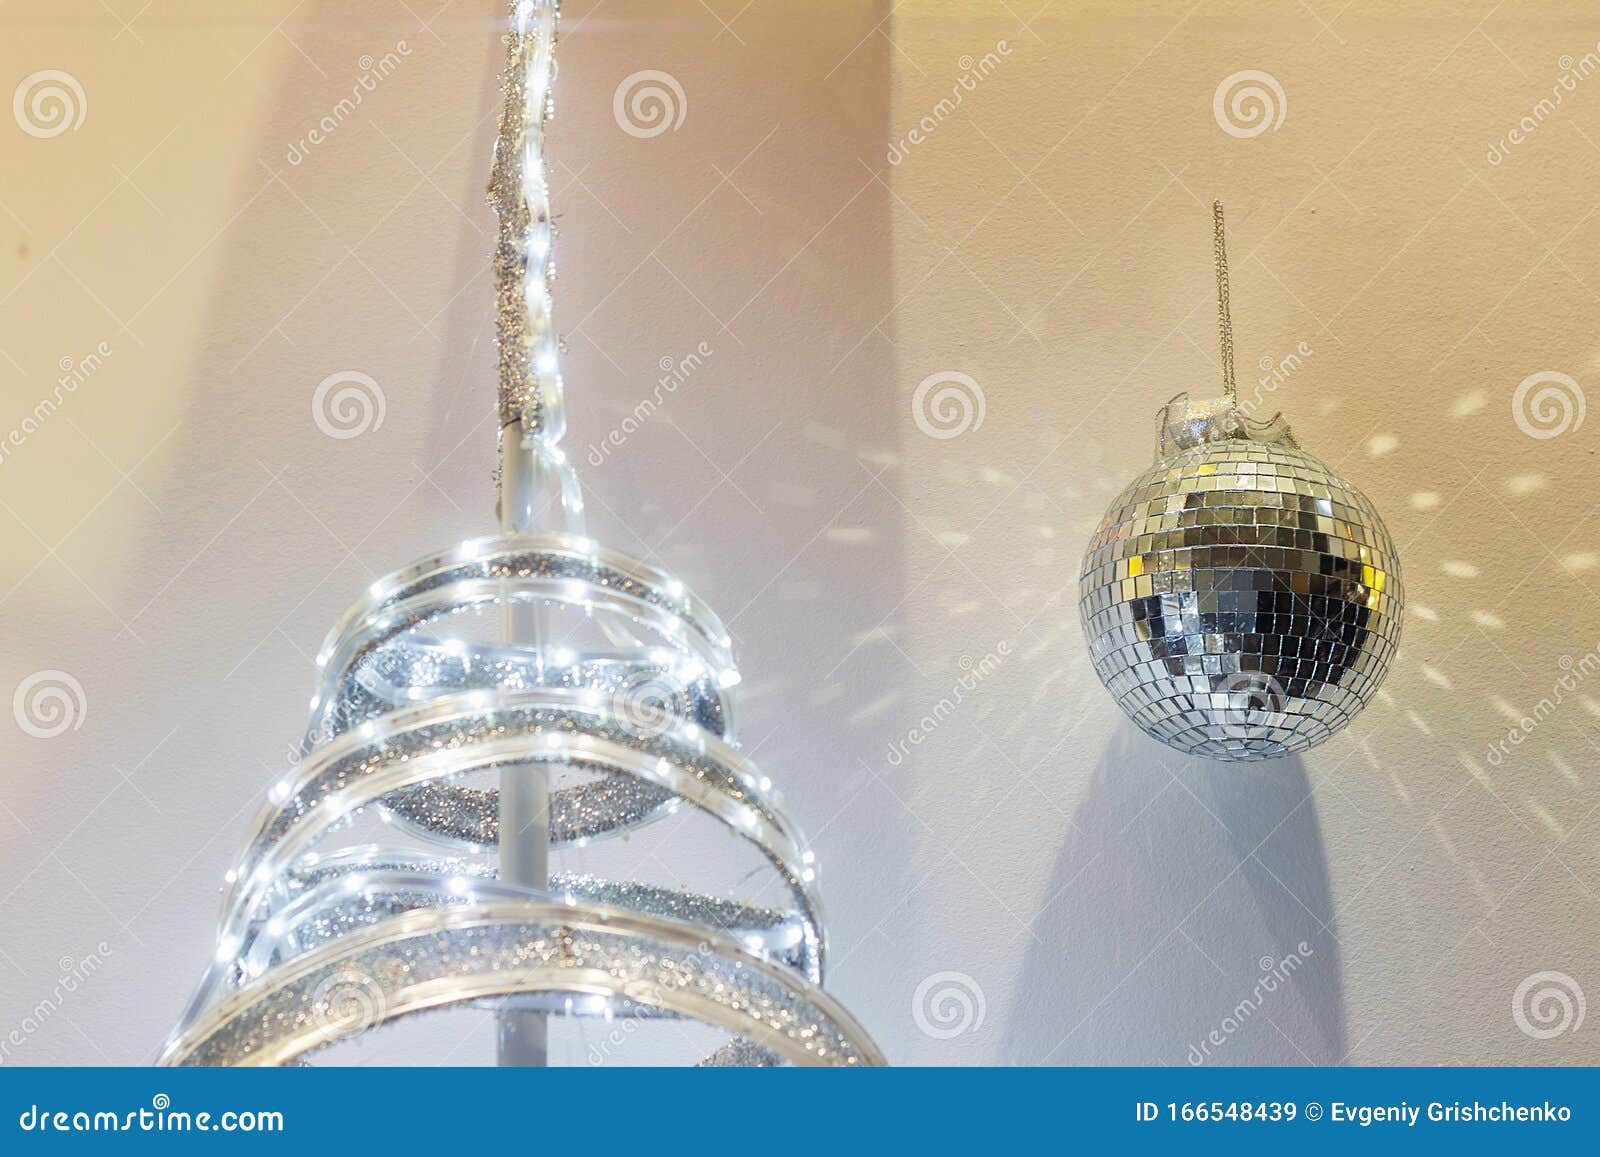 Futuristic Tree And Disco Ball Decorations Party Reflection Stock